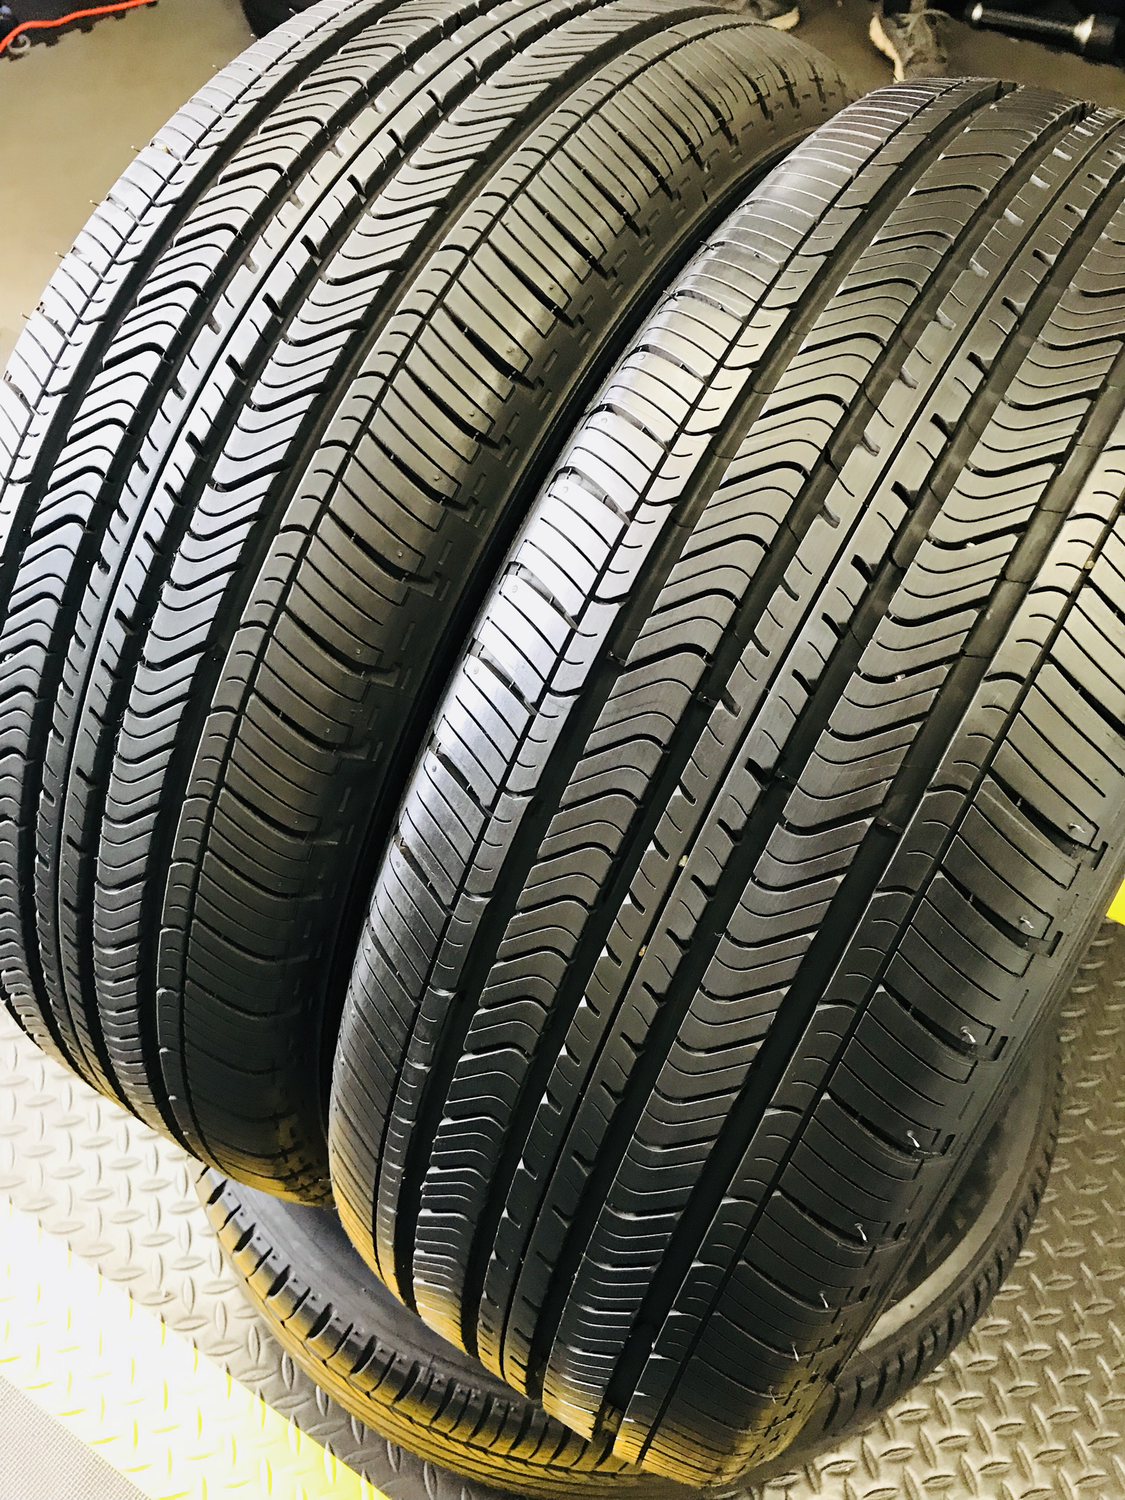 2 USED 215/55R17 Michelin PRIMACY MXV4 WITH 90% TREAD LIFE